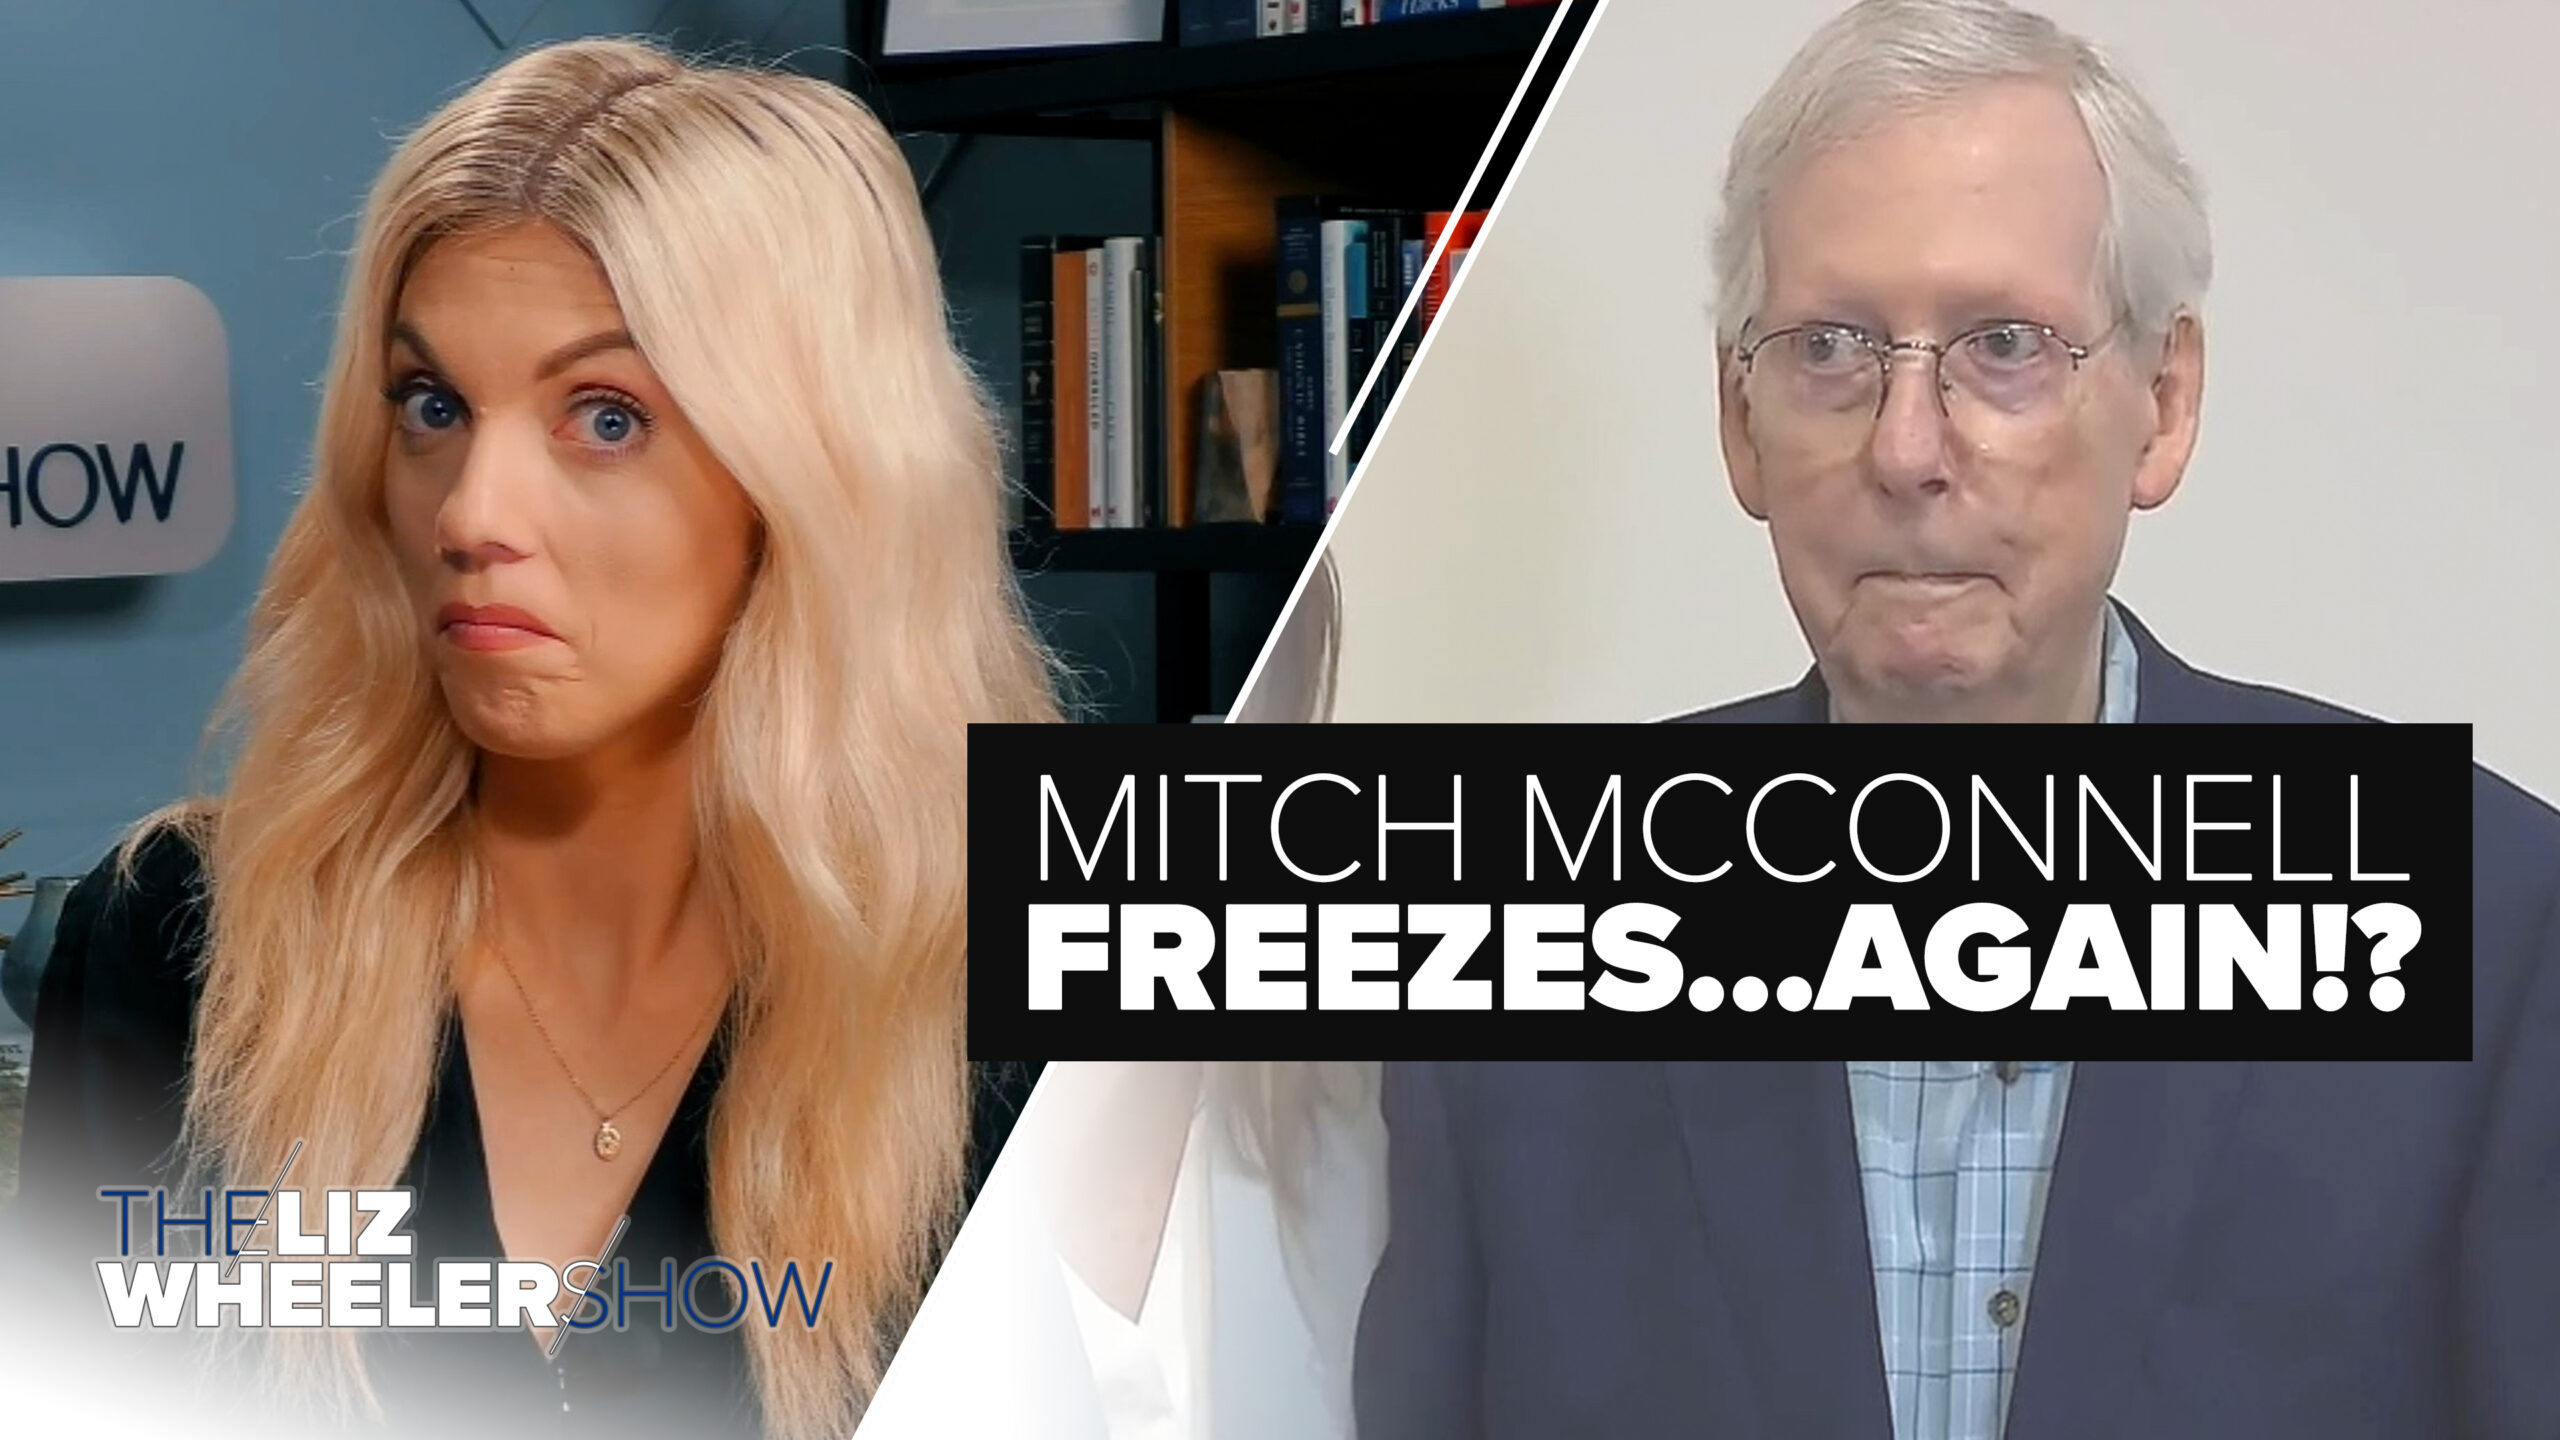 Mitch McConnell freezes up at a press conference in Kentucky